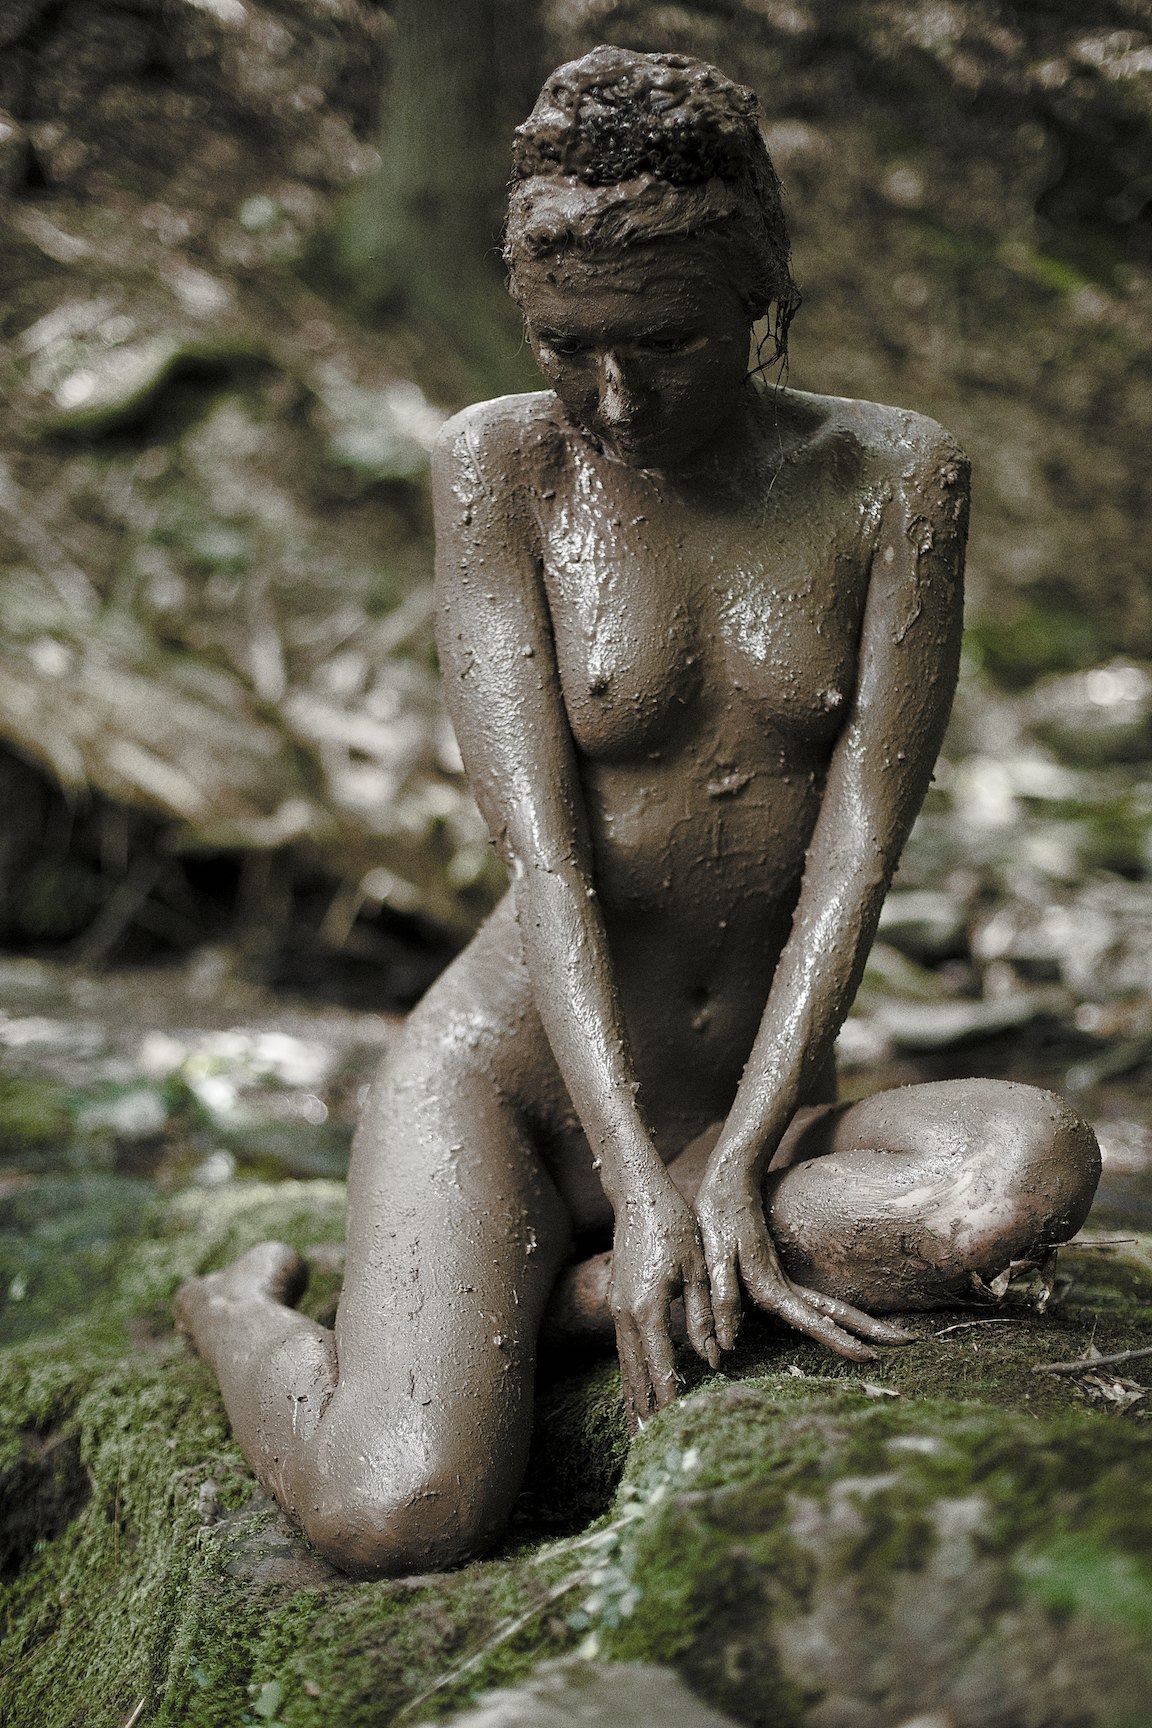 nielgalen:
“She sits as still as Stone - 2014
Model: Zoë West
Photo By: Niel Galen © 2014 - All Rights Reserved.
”
Amazing image! And a model willing to get dirty! X